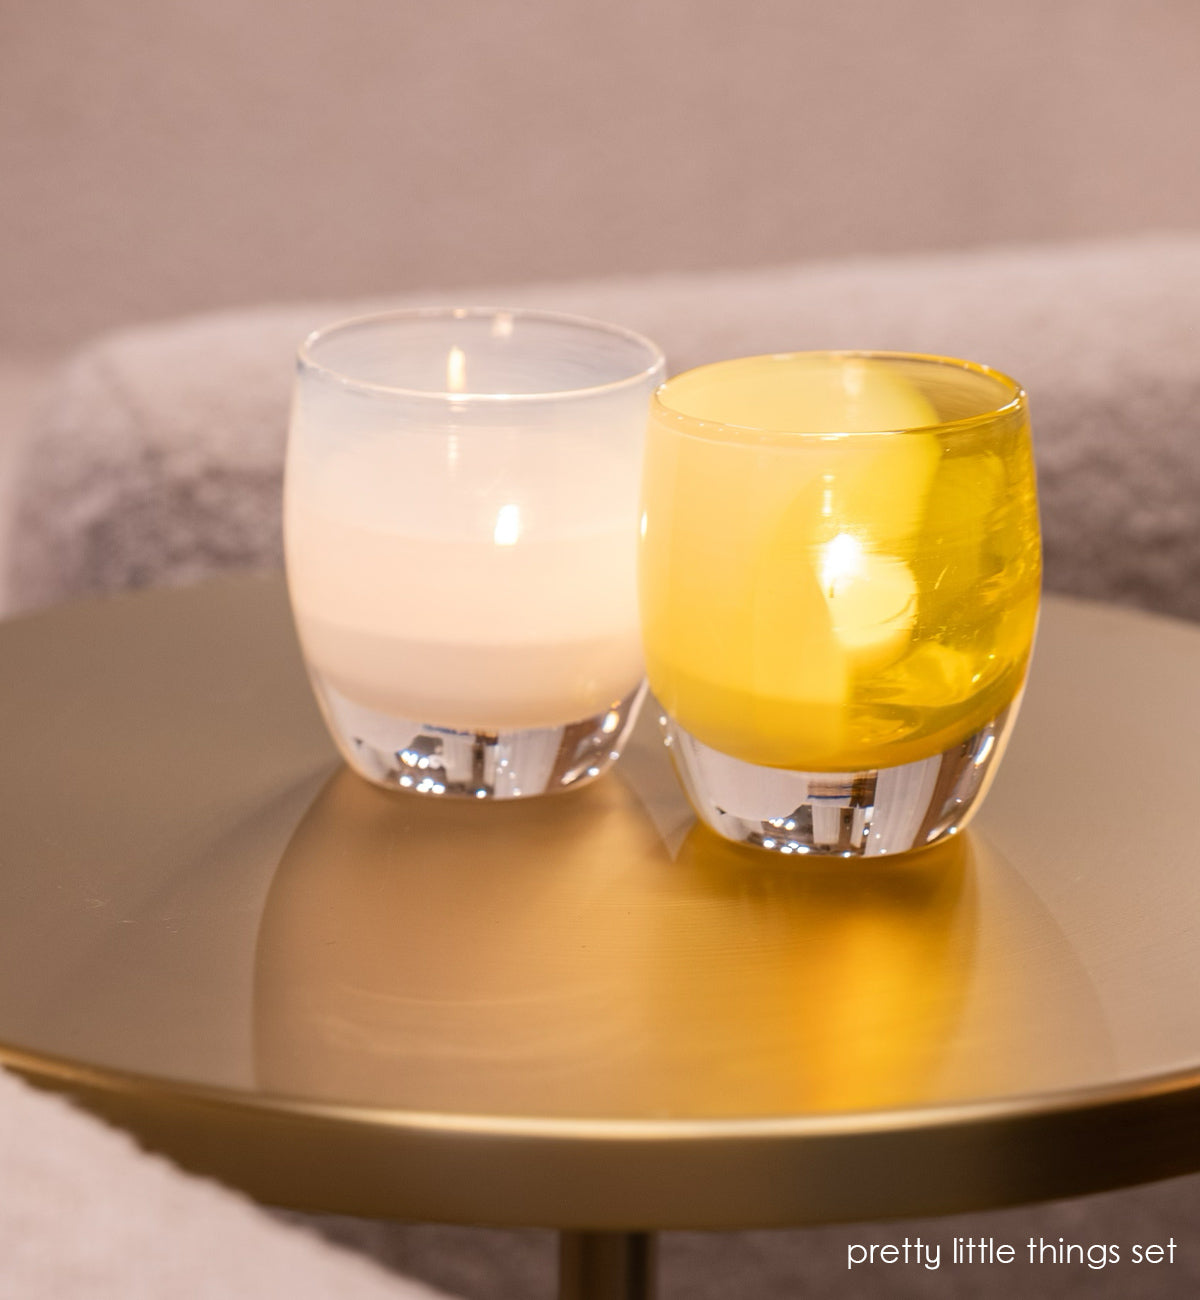 soft white dream and bright yellow just because come together to create a beautiful 2-piece hand-blown candle holder set.